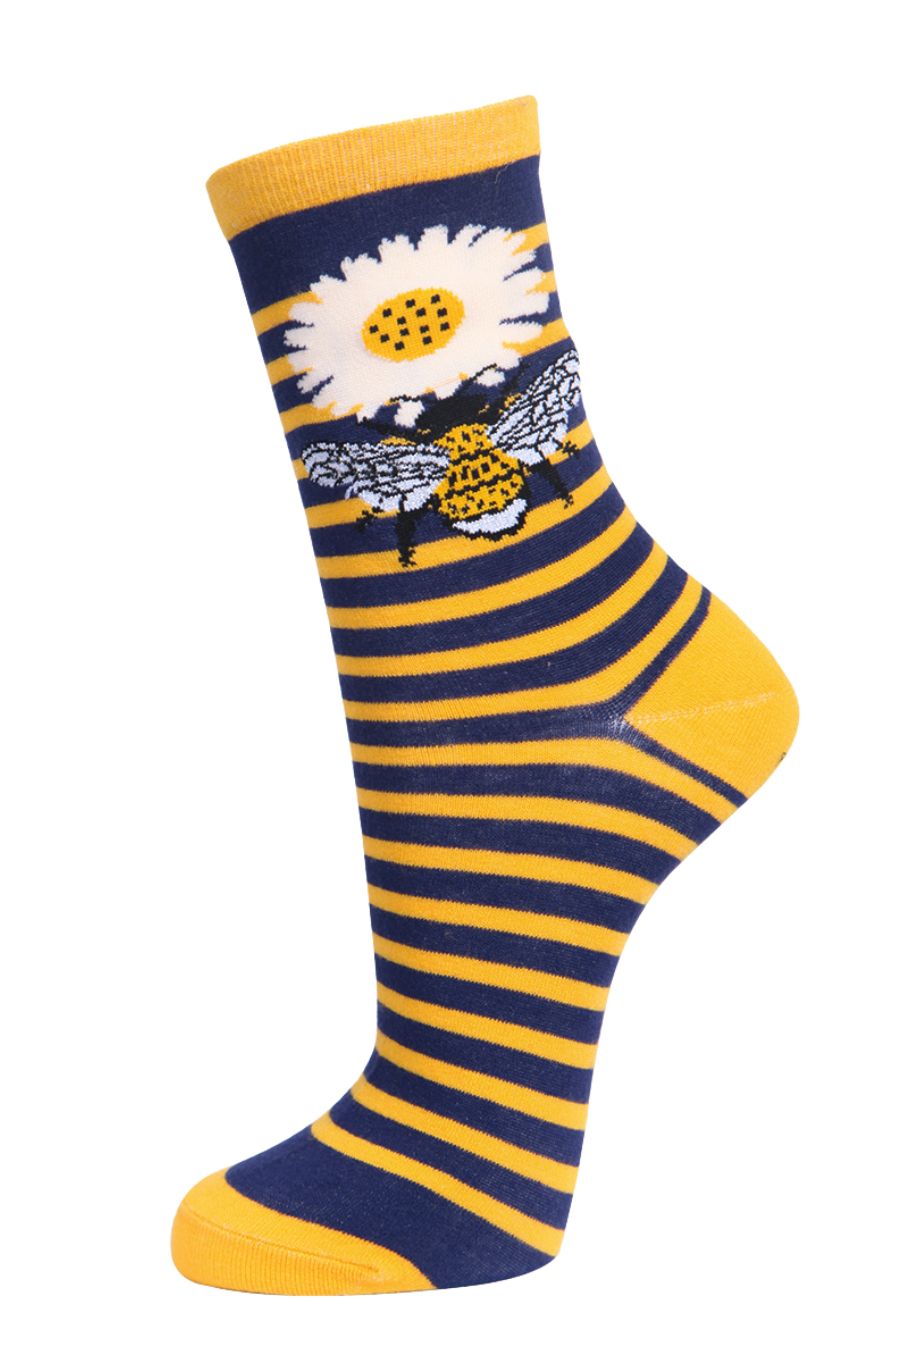 navy blue, yellow striped ankle socks with a large bee and white daisy flower